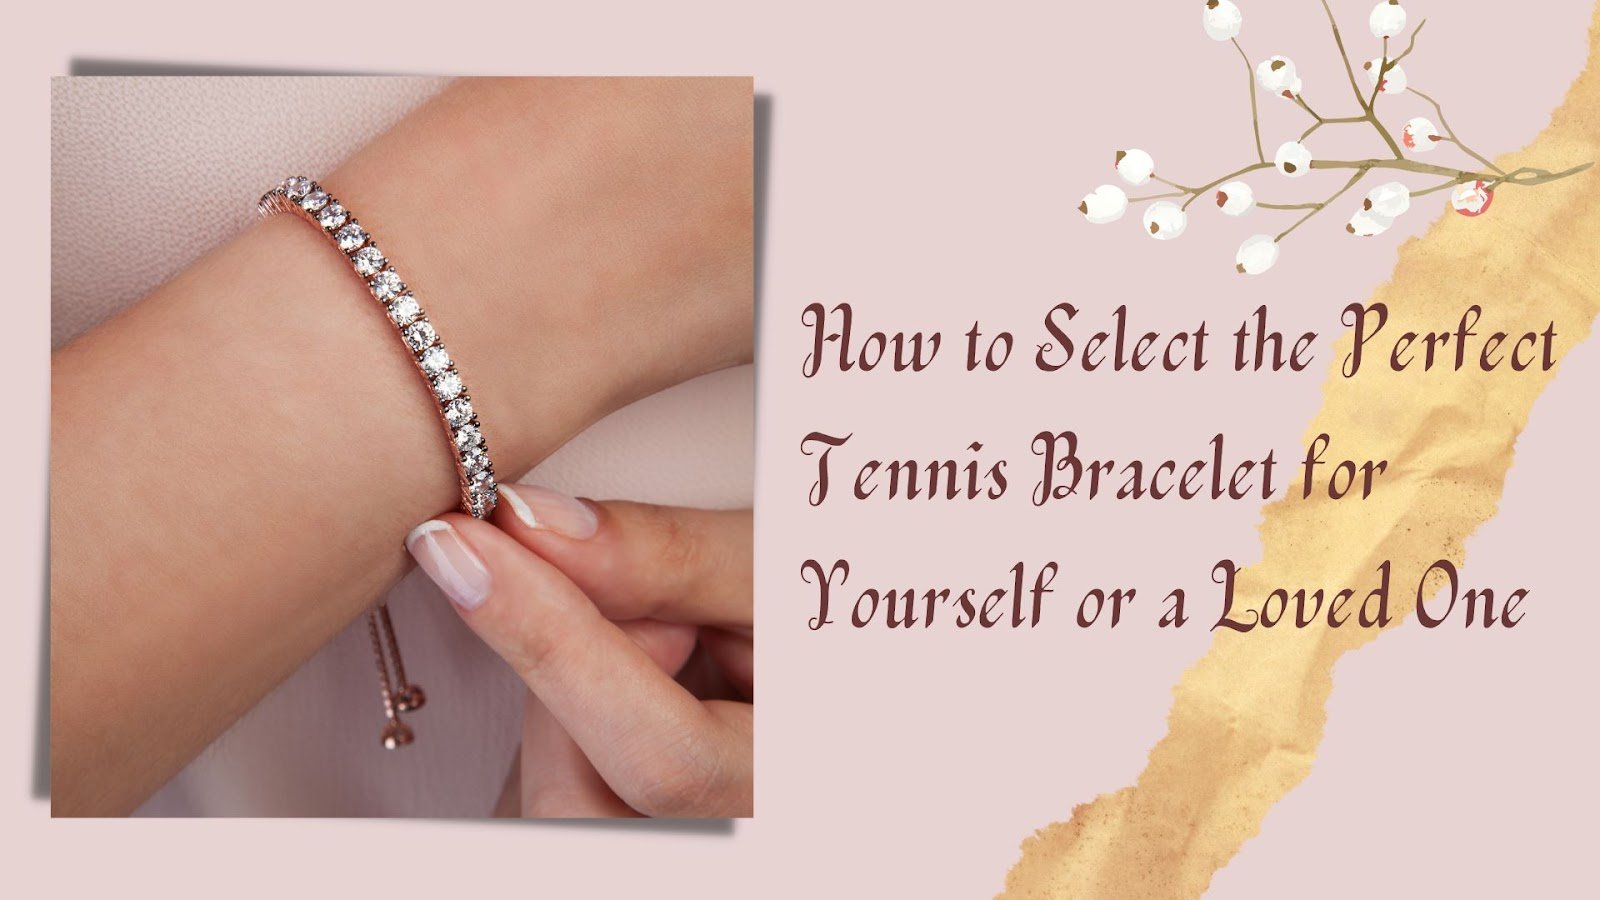 How to Select the Perfect Tennis Bracelet for Yourself or a Loved One